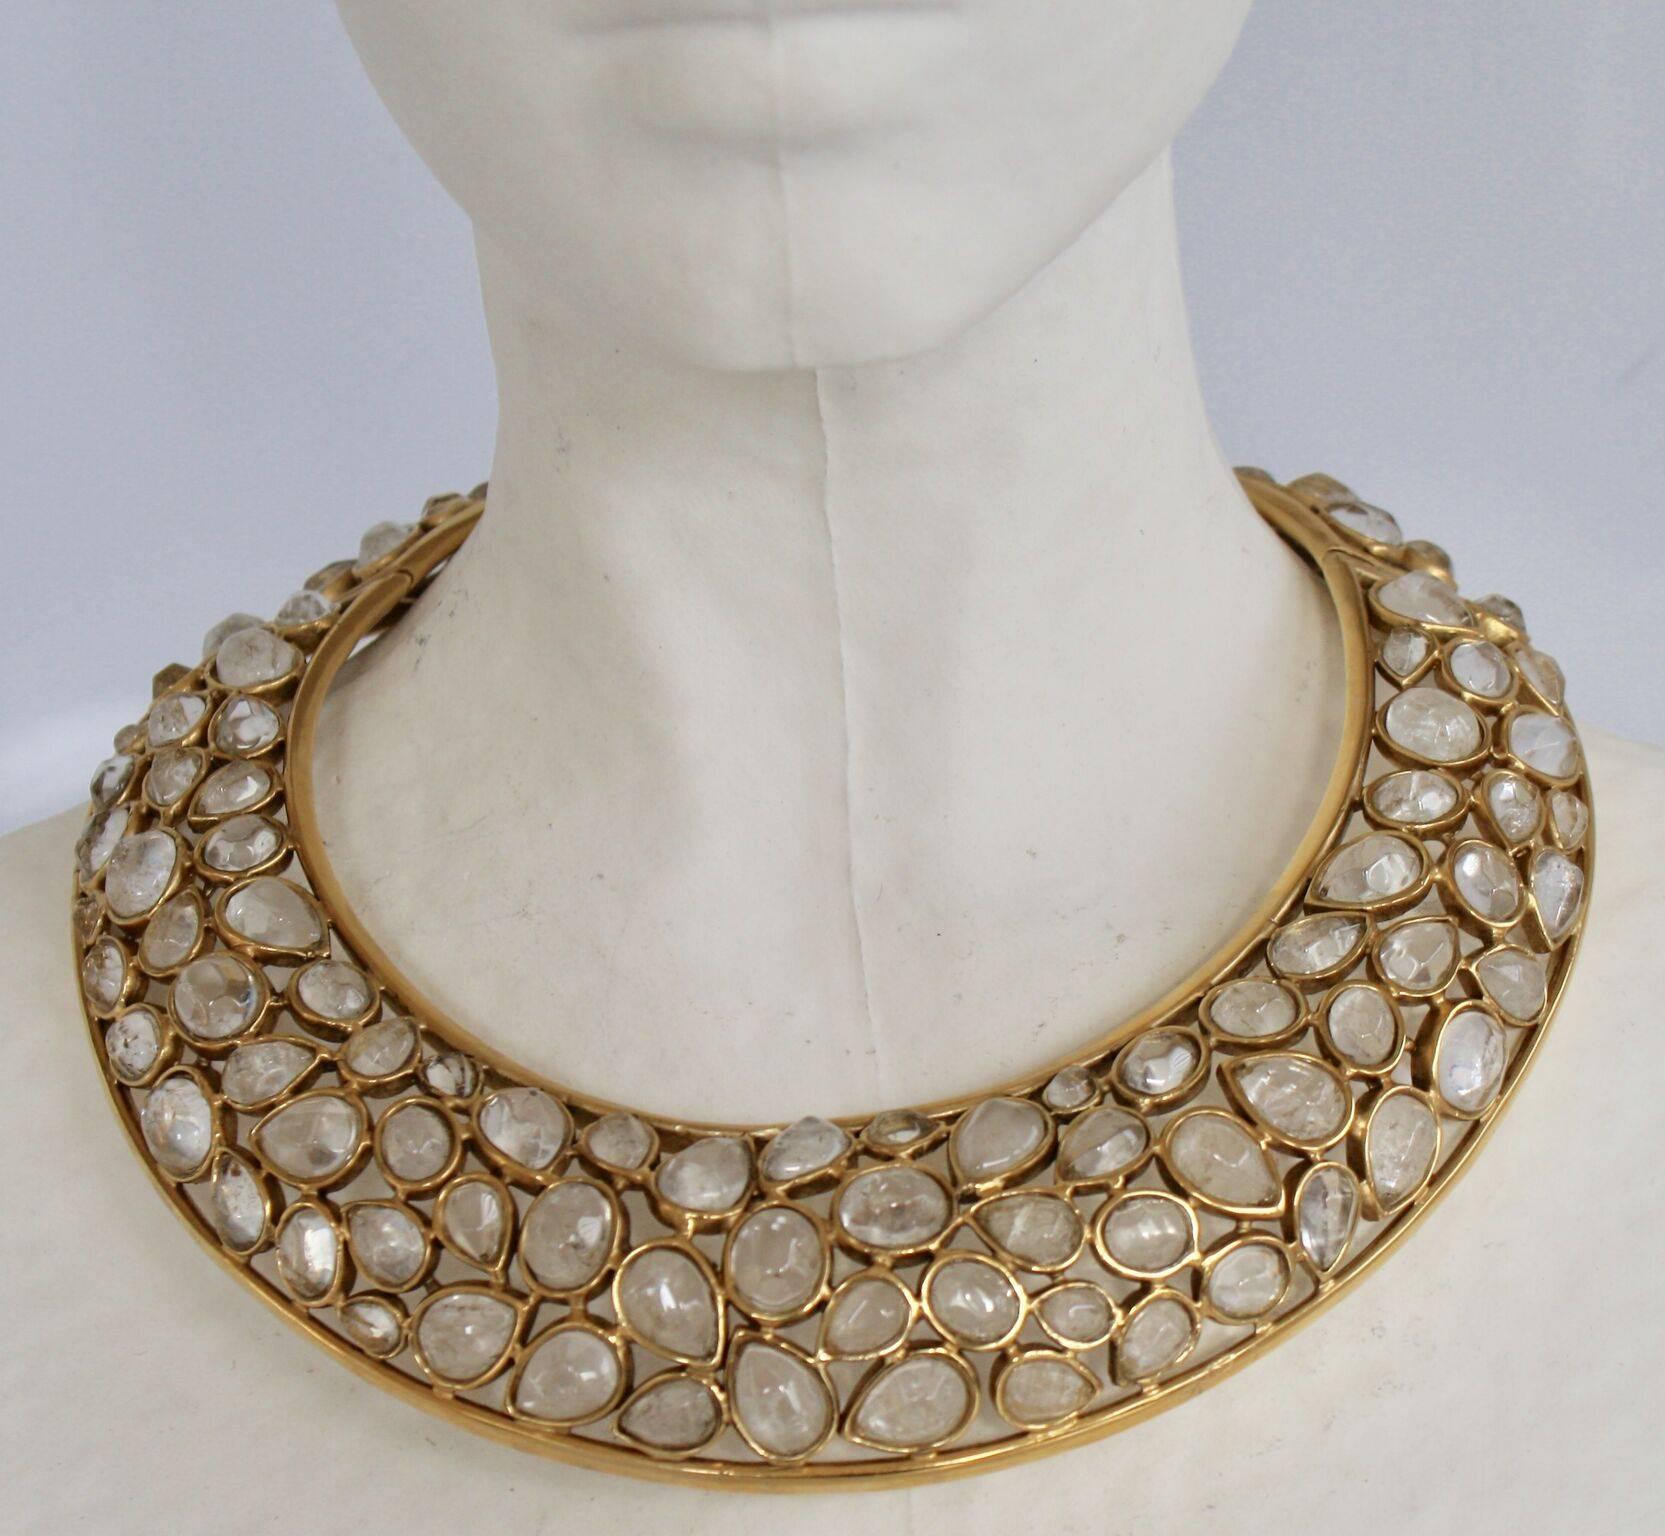 Statement making rock crystal and pale gold torque necklace from Goossens Paris. 